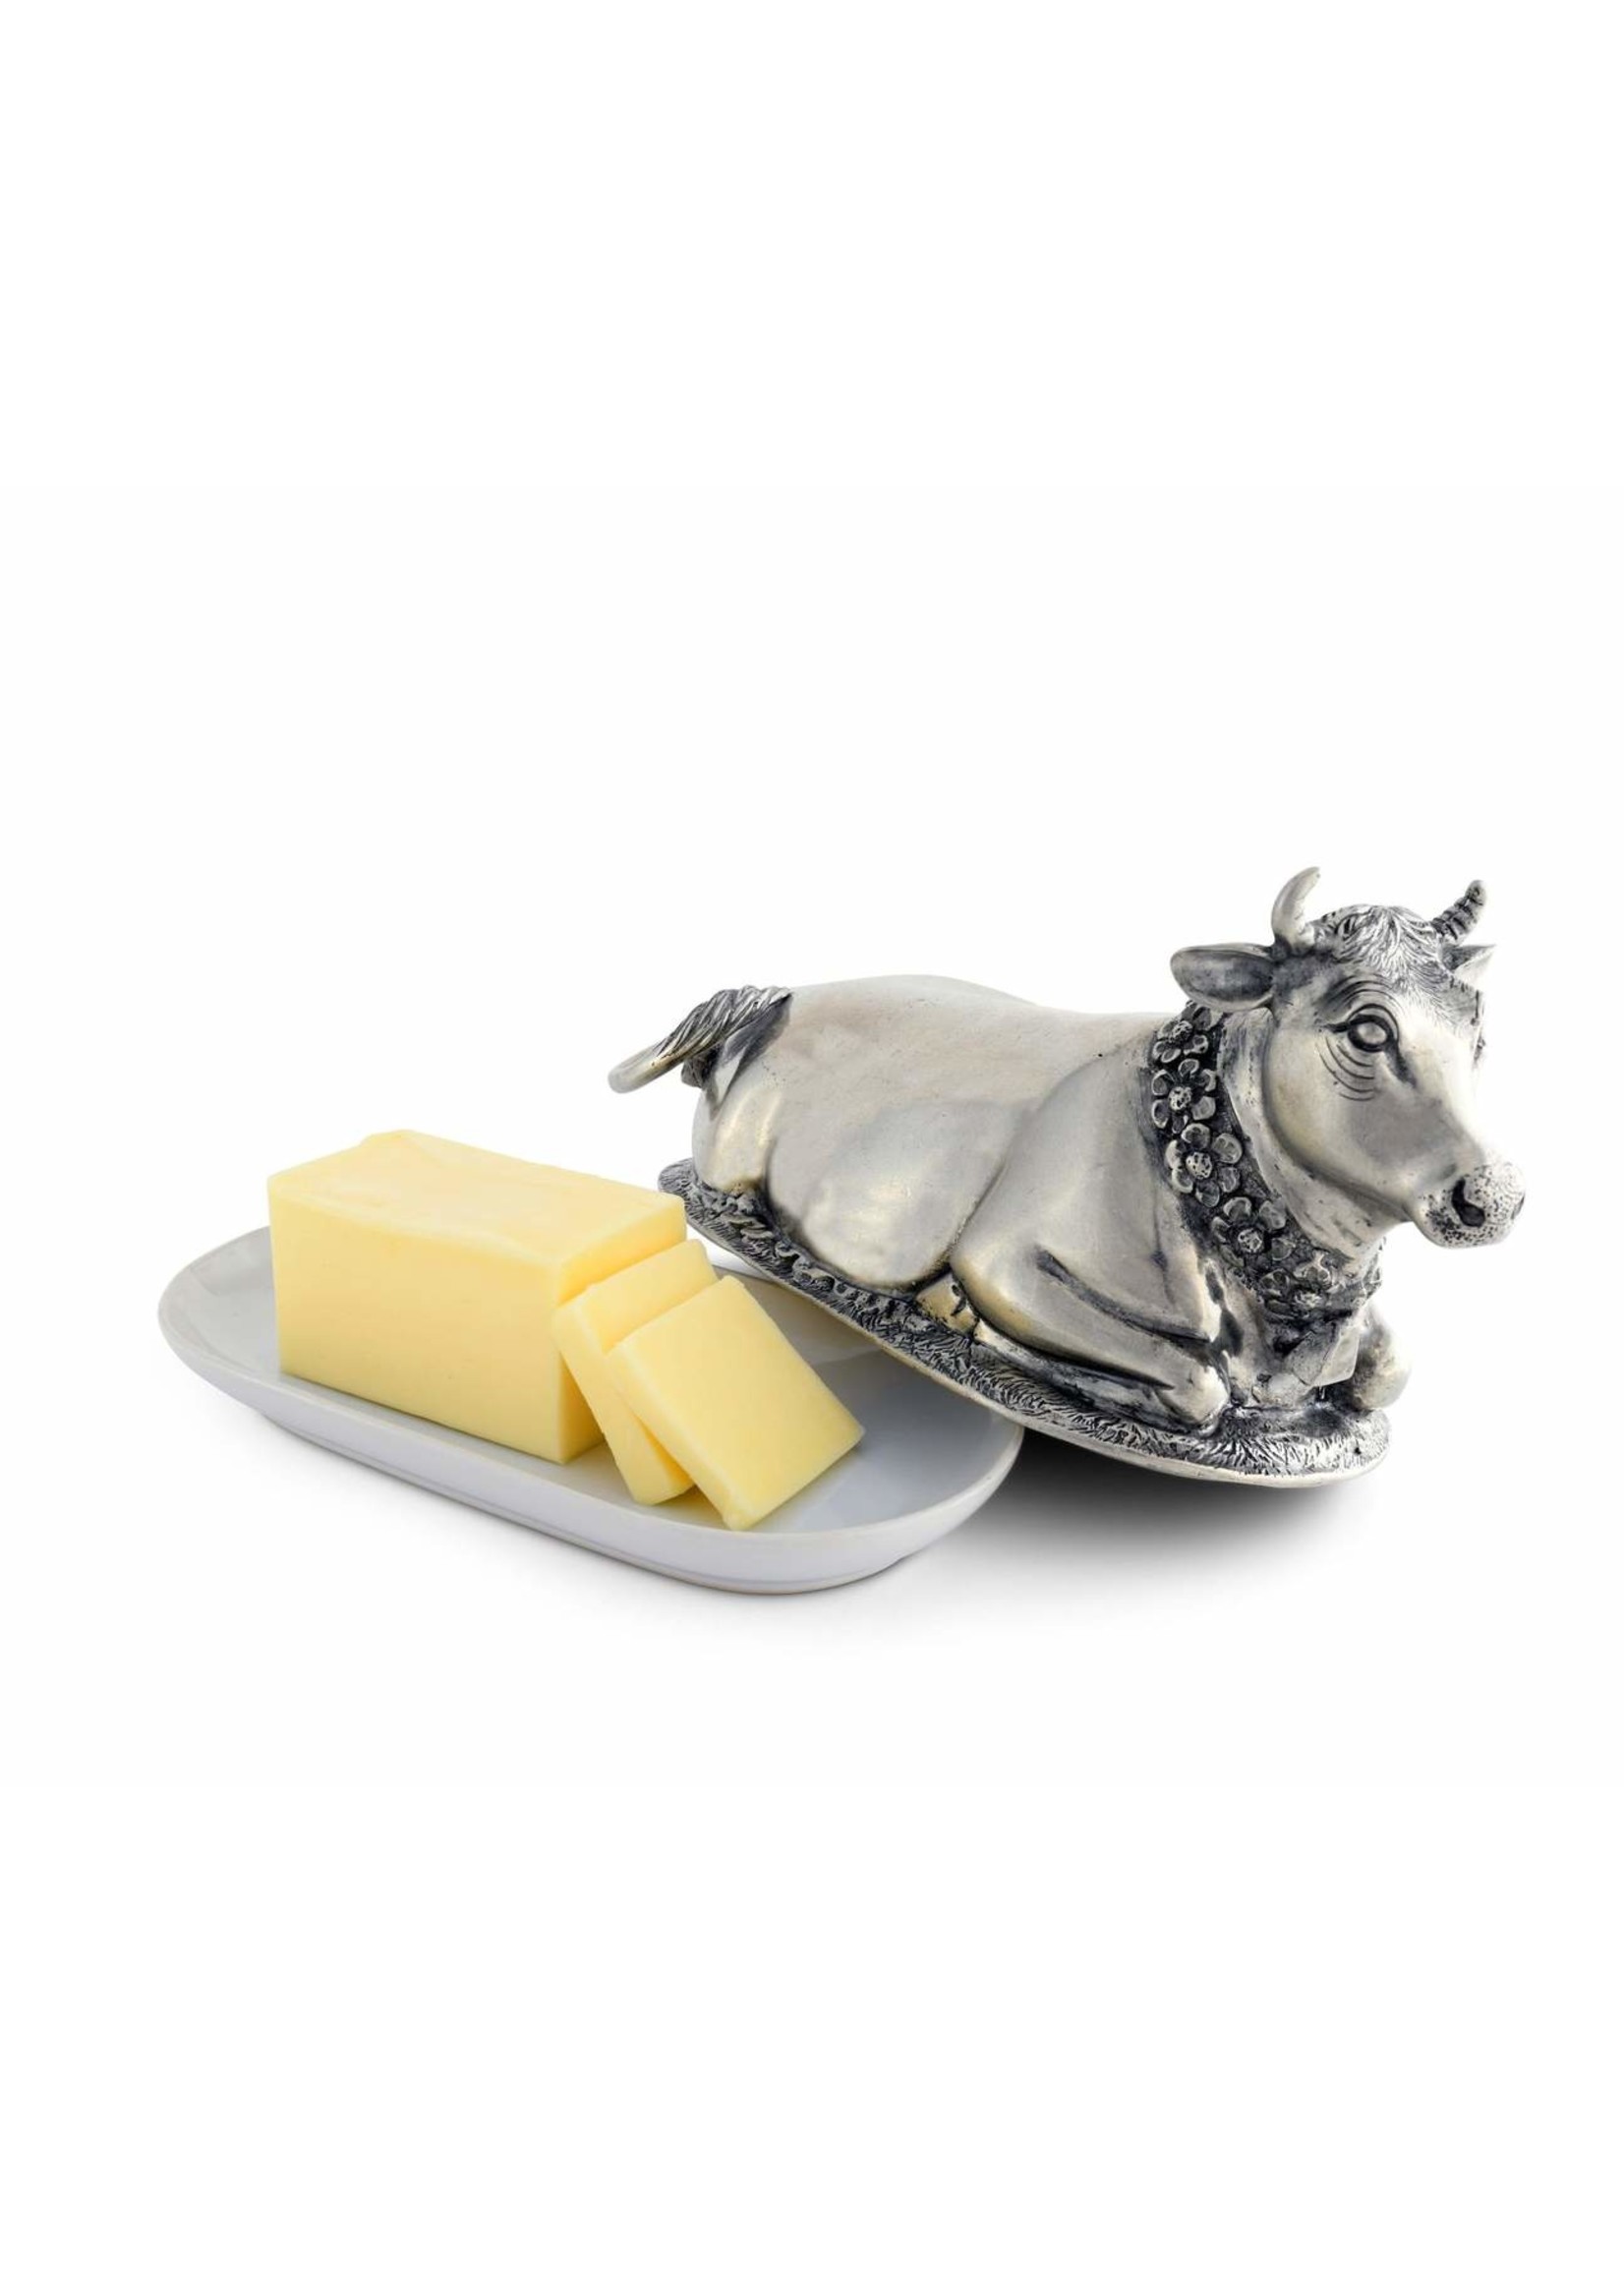 Butter Dish - Mabel Cow